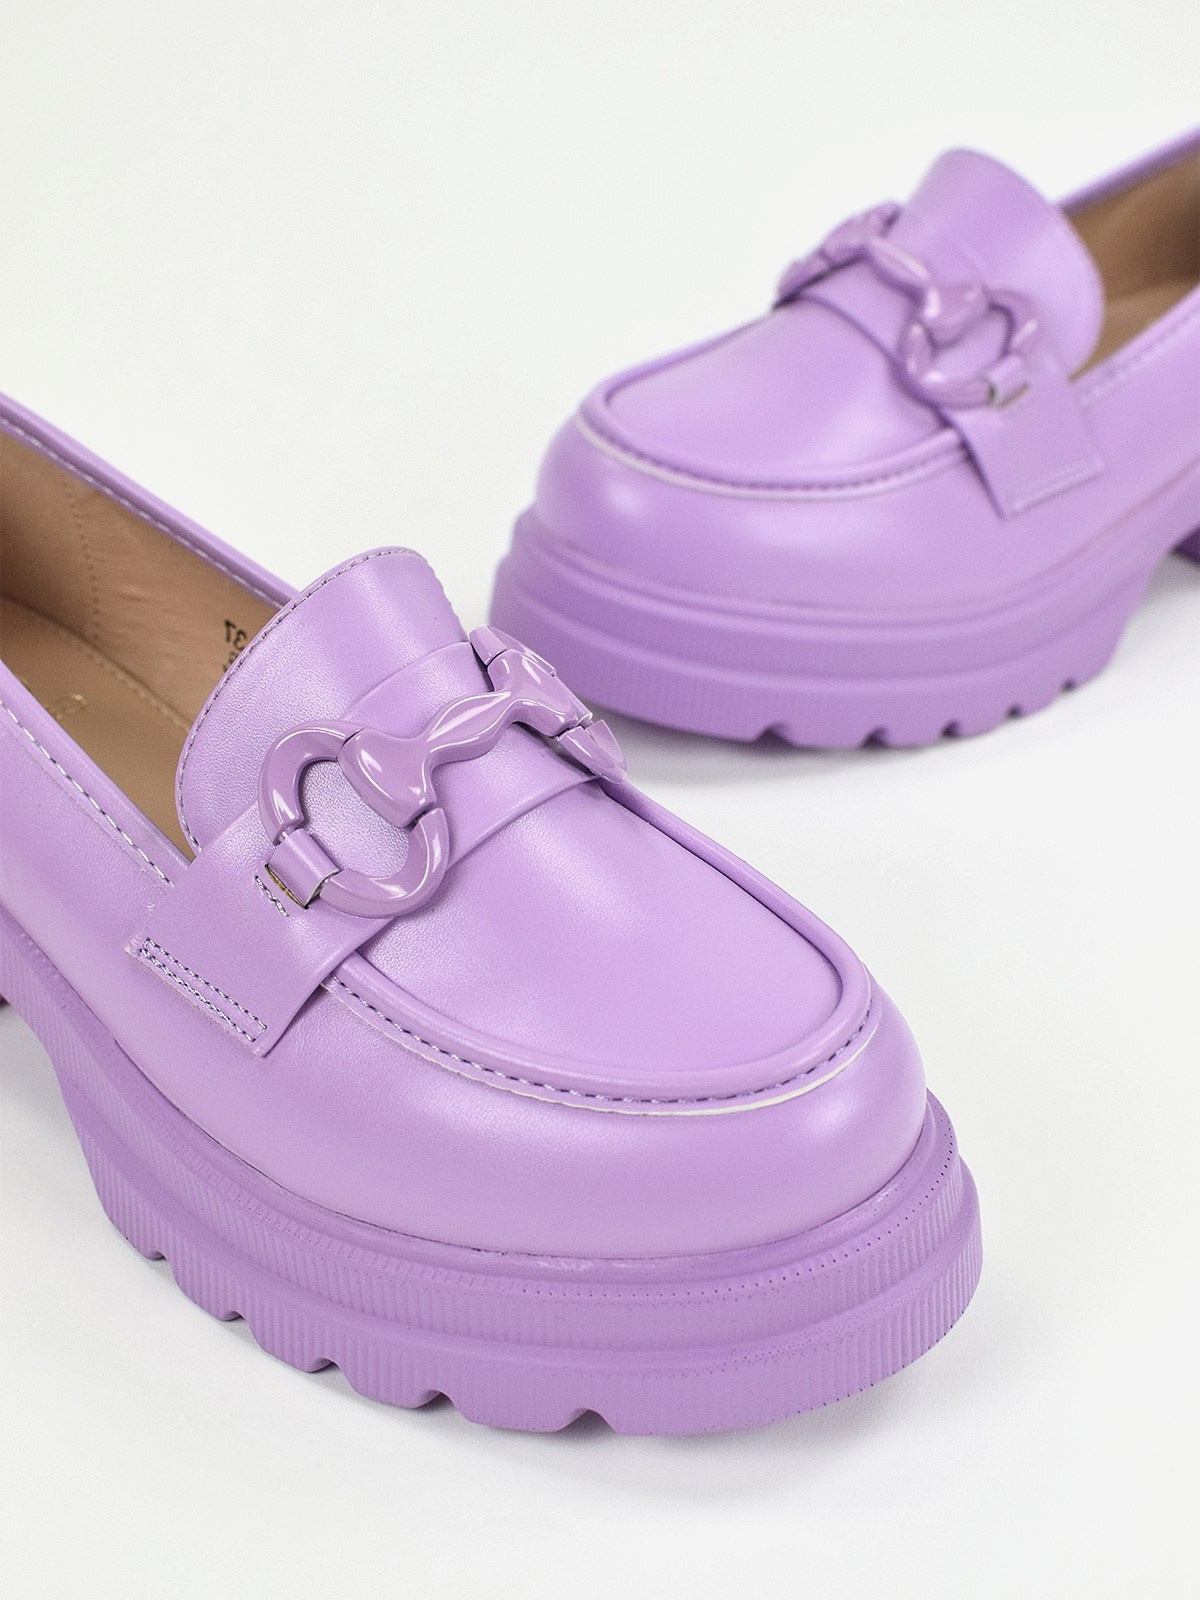 Chunky loafers with front trim in purple